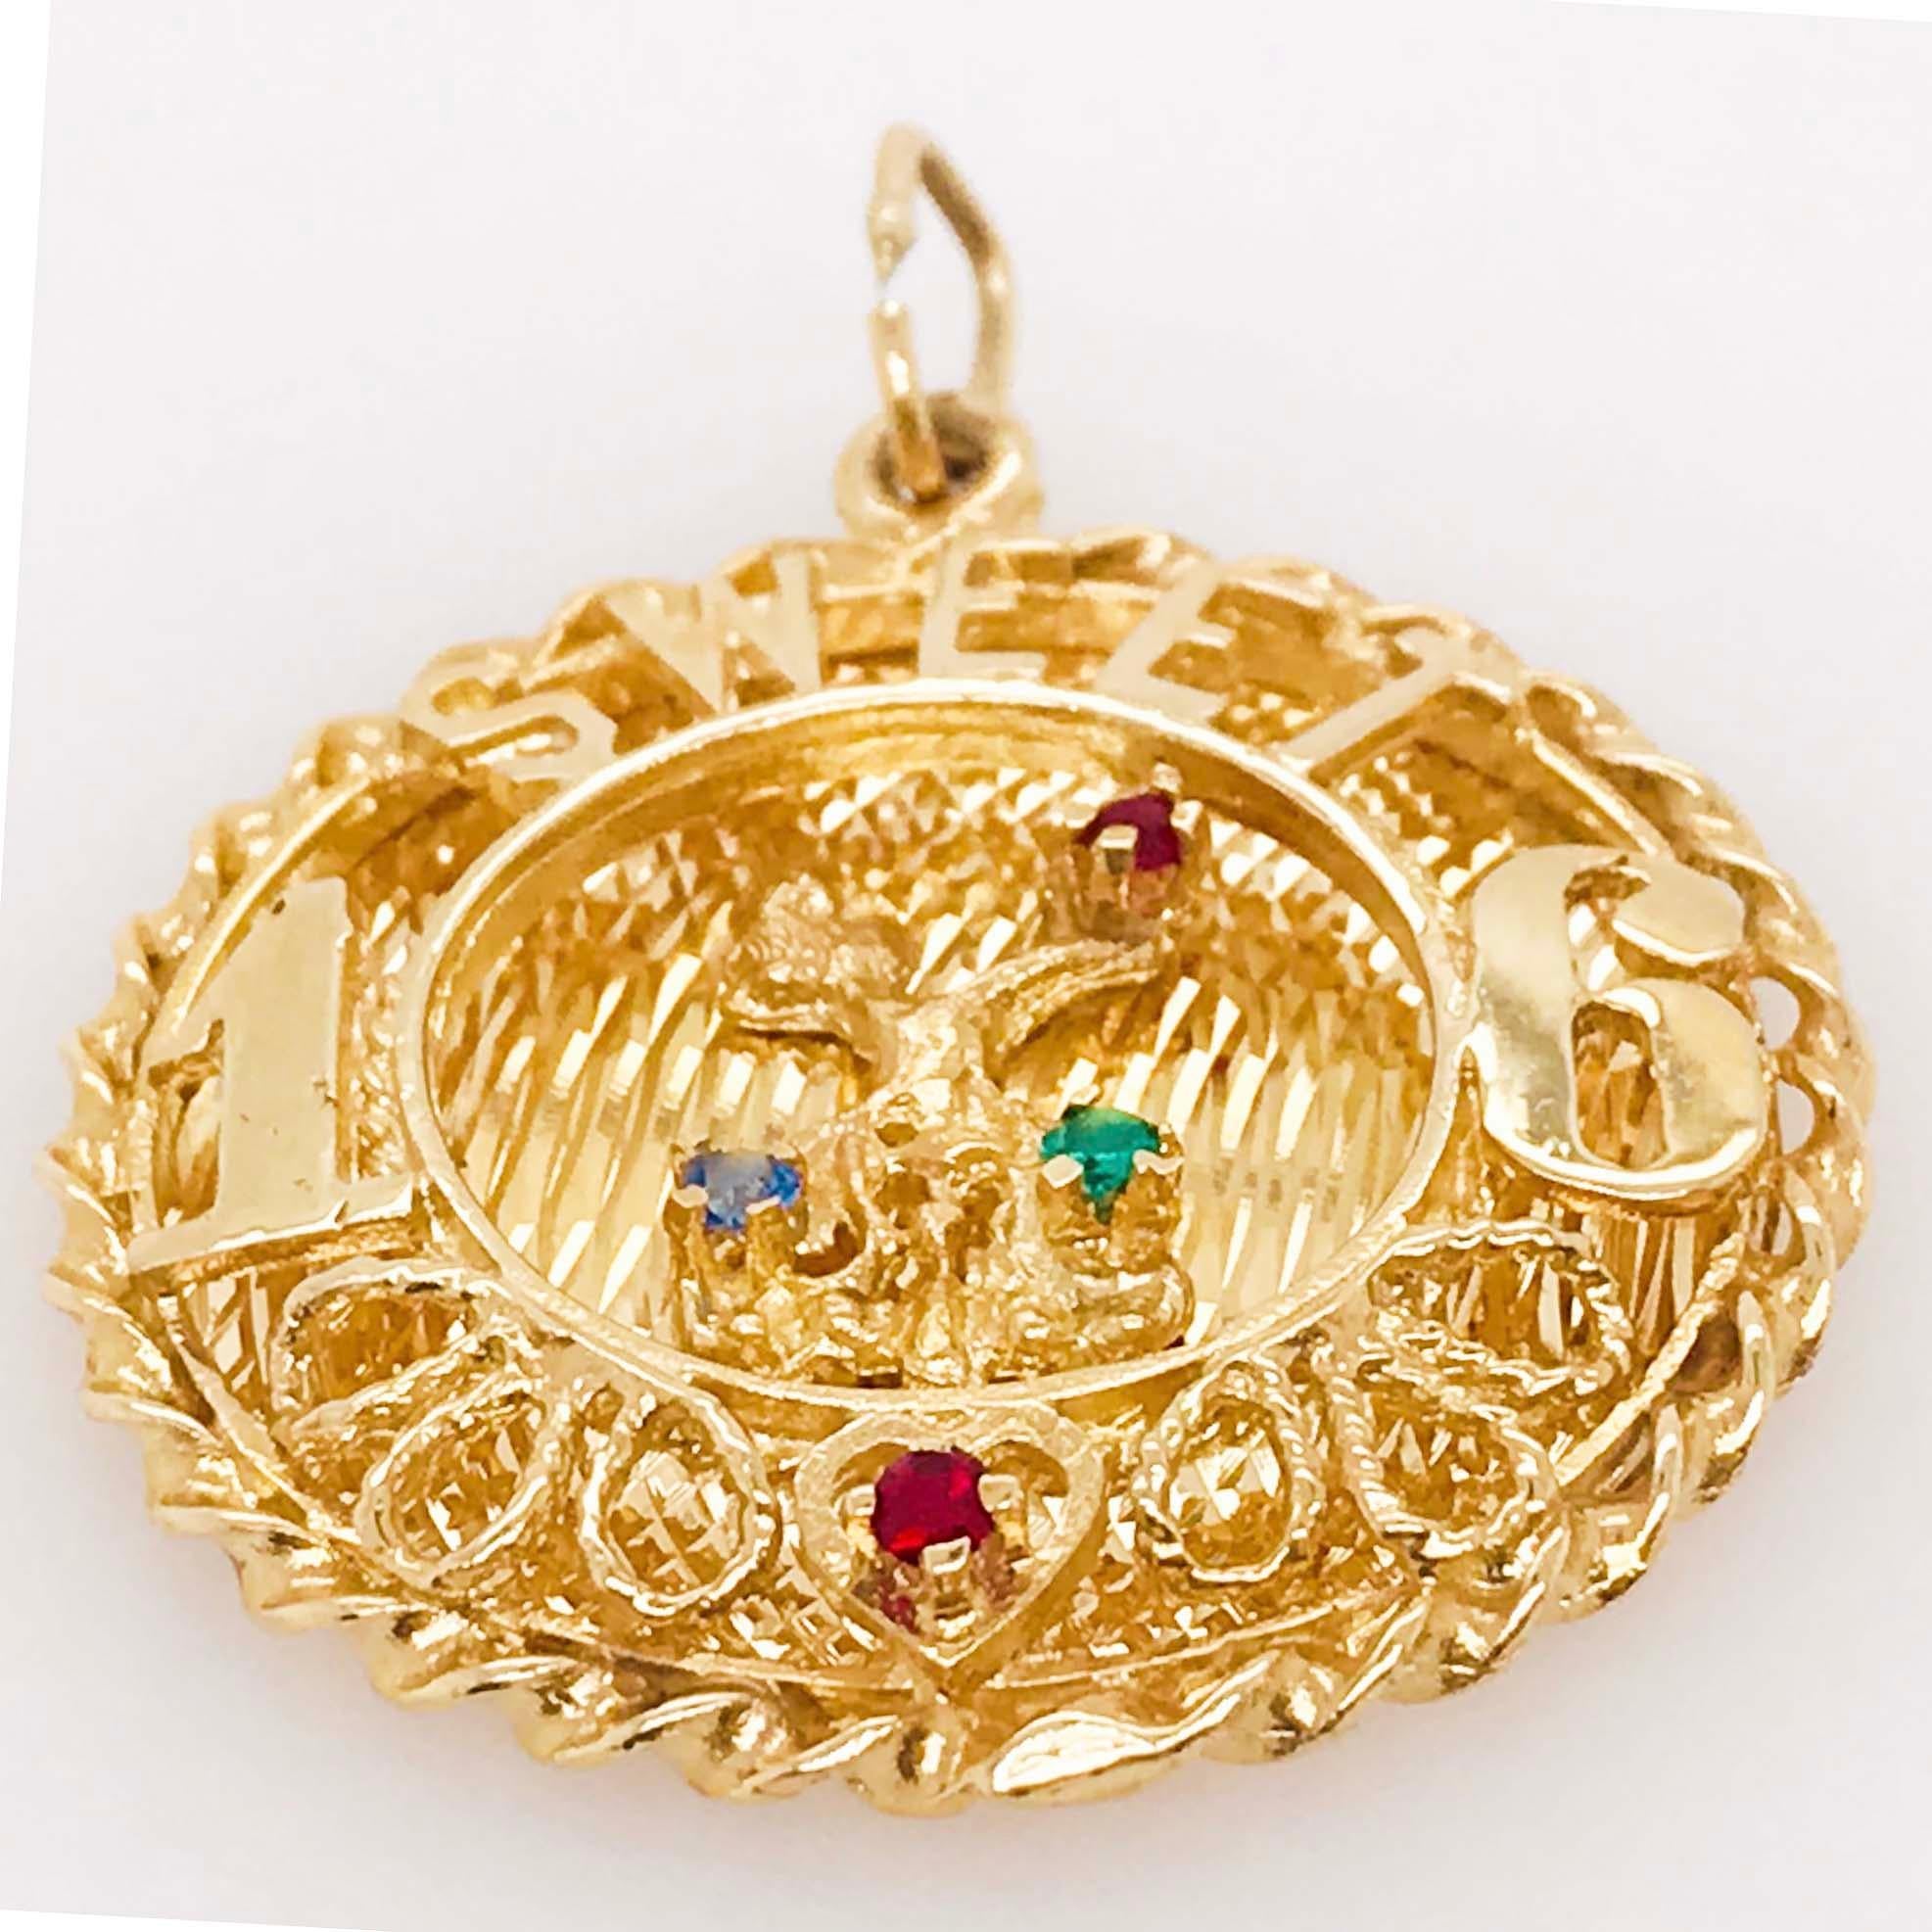 The 14 kt gold Sweet 16 large charm is a handmade fine jewelry item. The disk charm is made with 14k yellow gold that is rich in color! The charm has a round shape with a twisted gold rope framing the disk. On the top there are handmade letters that